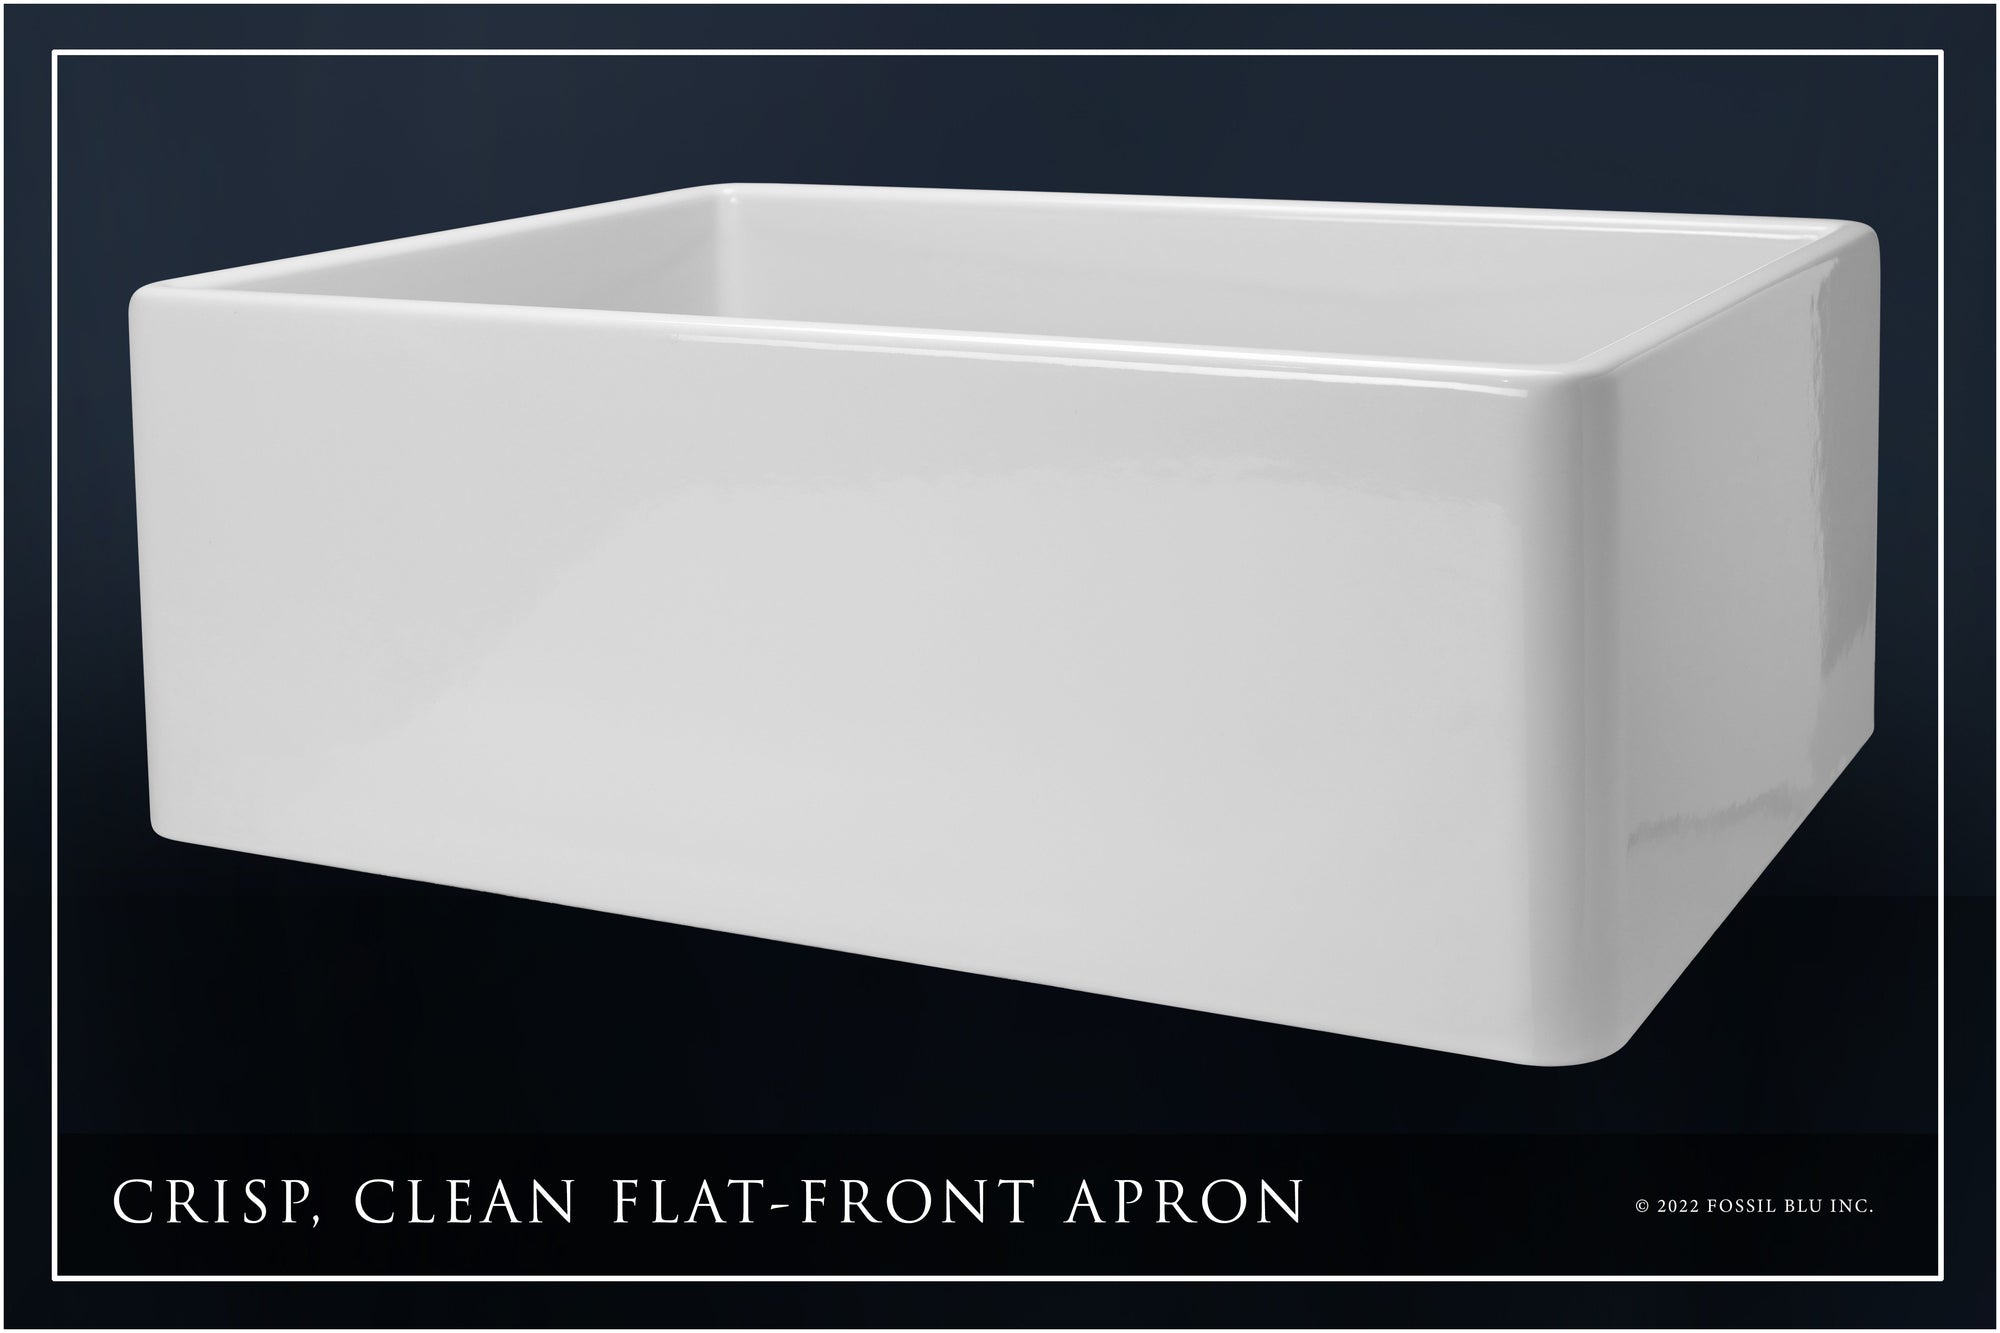 FSW1000AC LUXURY 26-INCH SOLID FIRECLAY FARMHOUSE SINK IN WHITE, ANTIQUE COPPER ACCS, FLAT FRONT